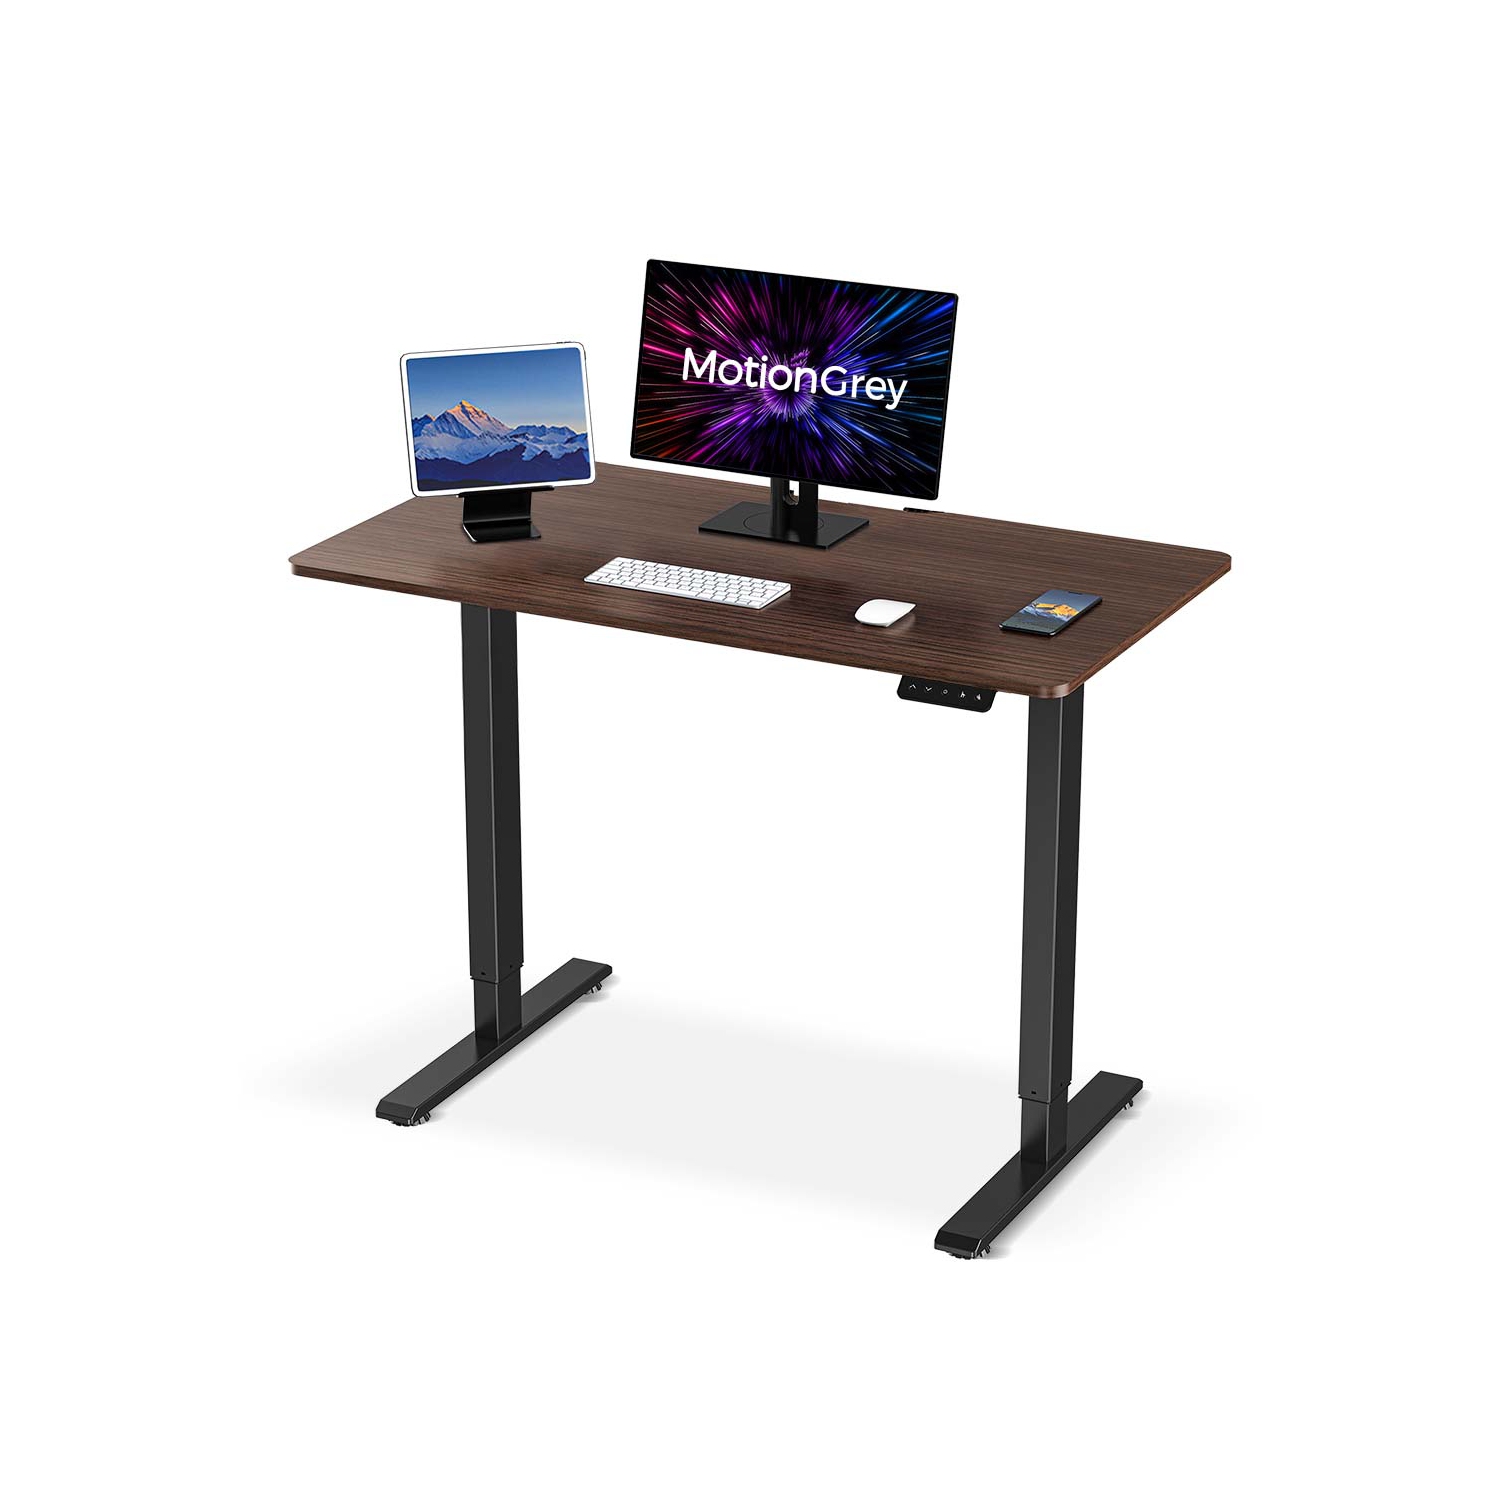 MotionGrey Standing Desk Height Adjustable Electric Motor Sit-to-Stand Desk Computer for Home and Office - Black Frame (43x24 Tabletop Included) - Only at Best Buy